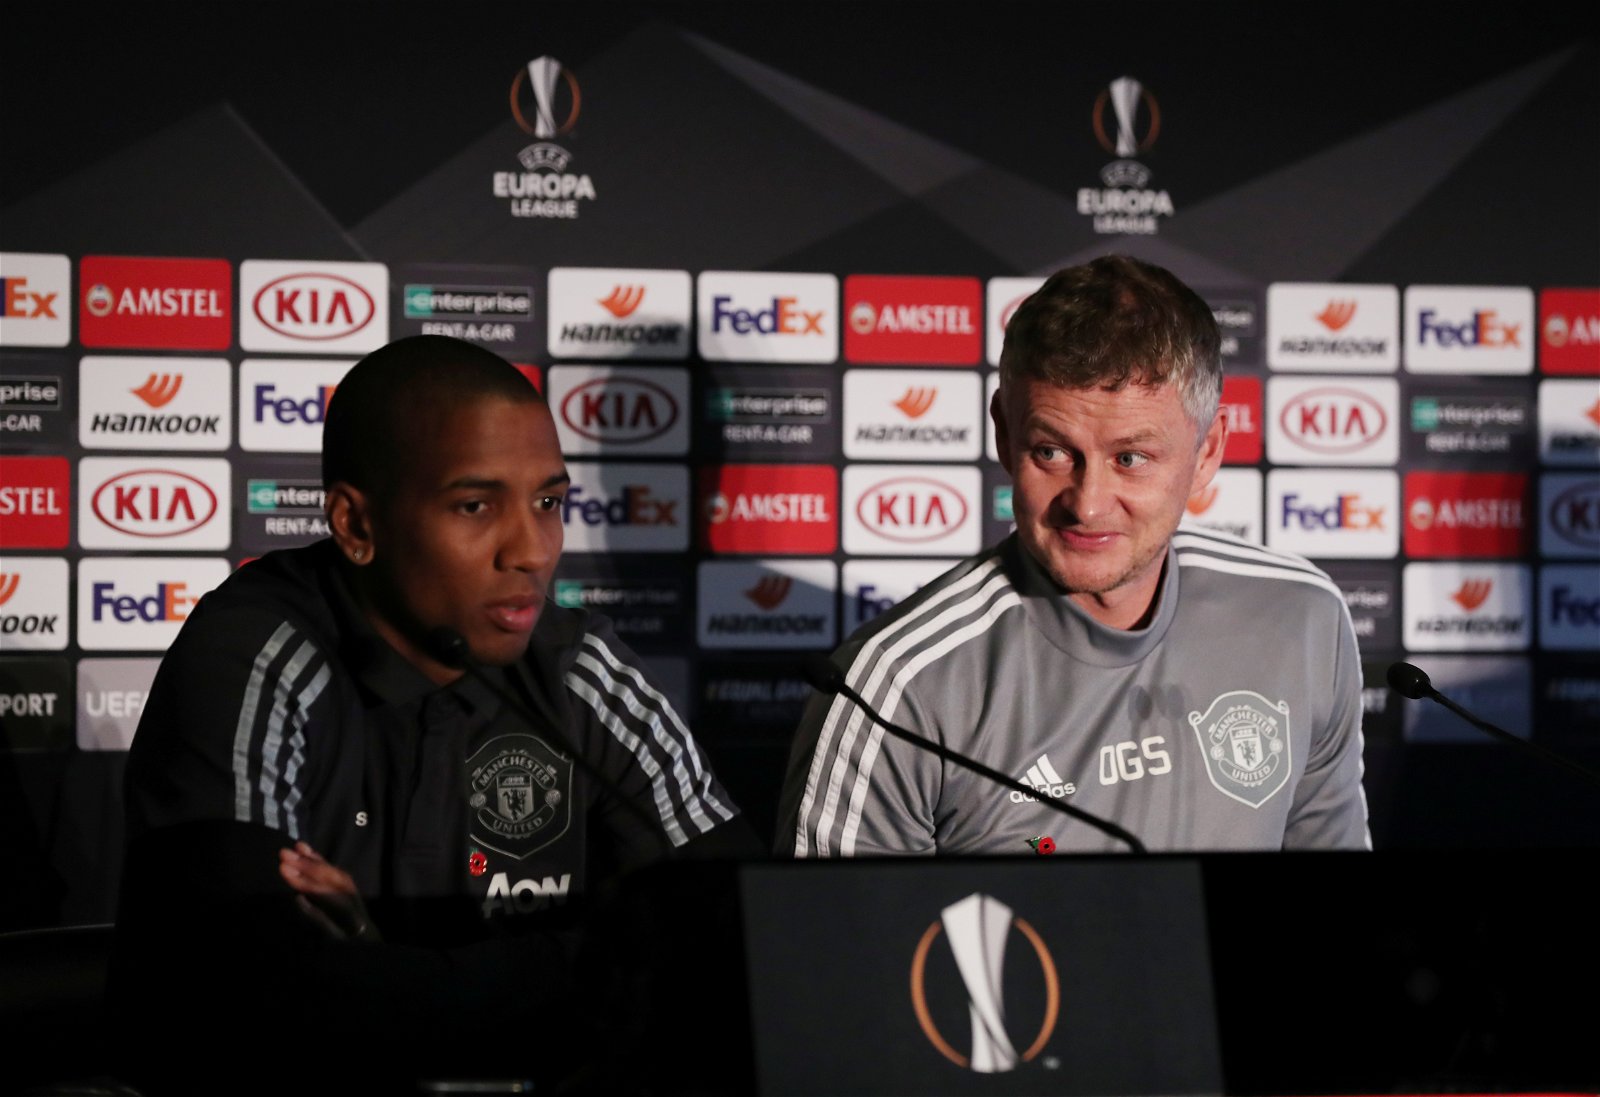 Ole wants to bring in youth for Europa